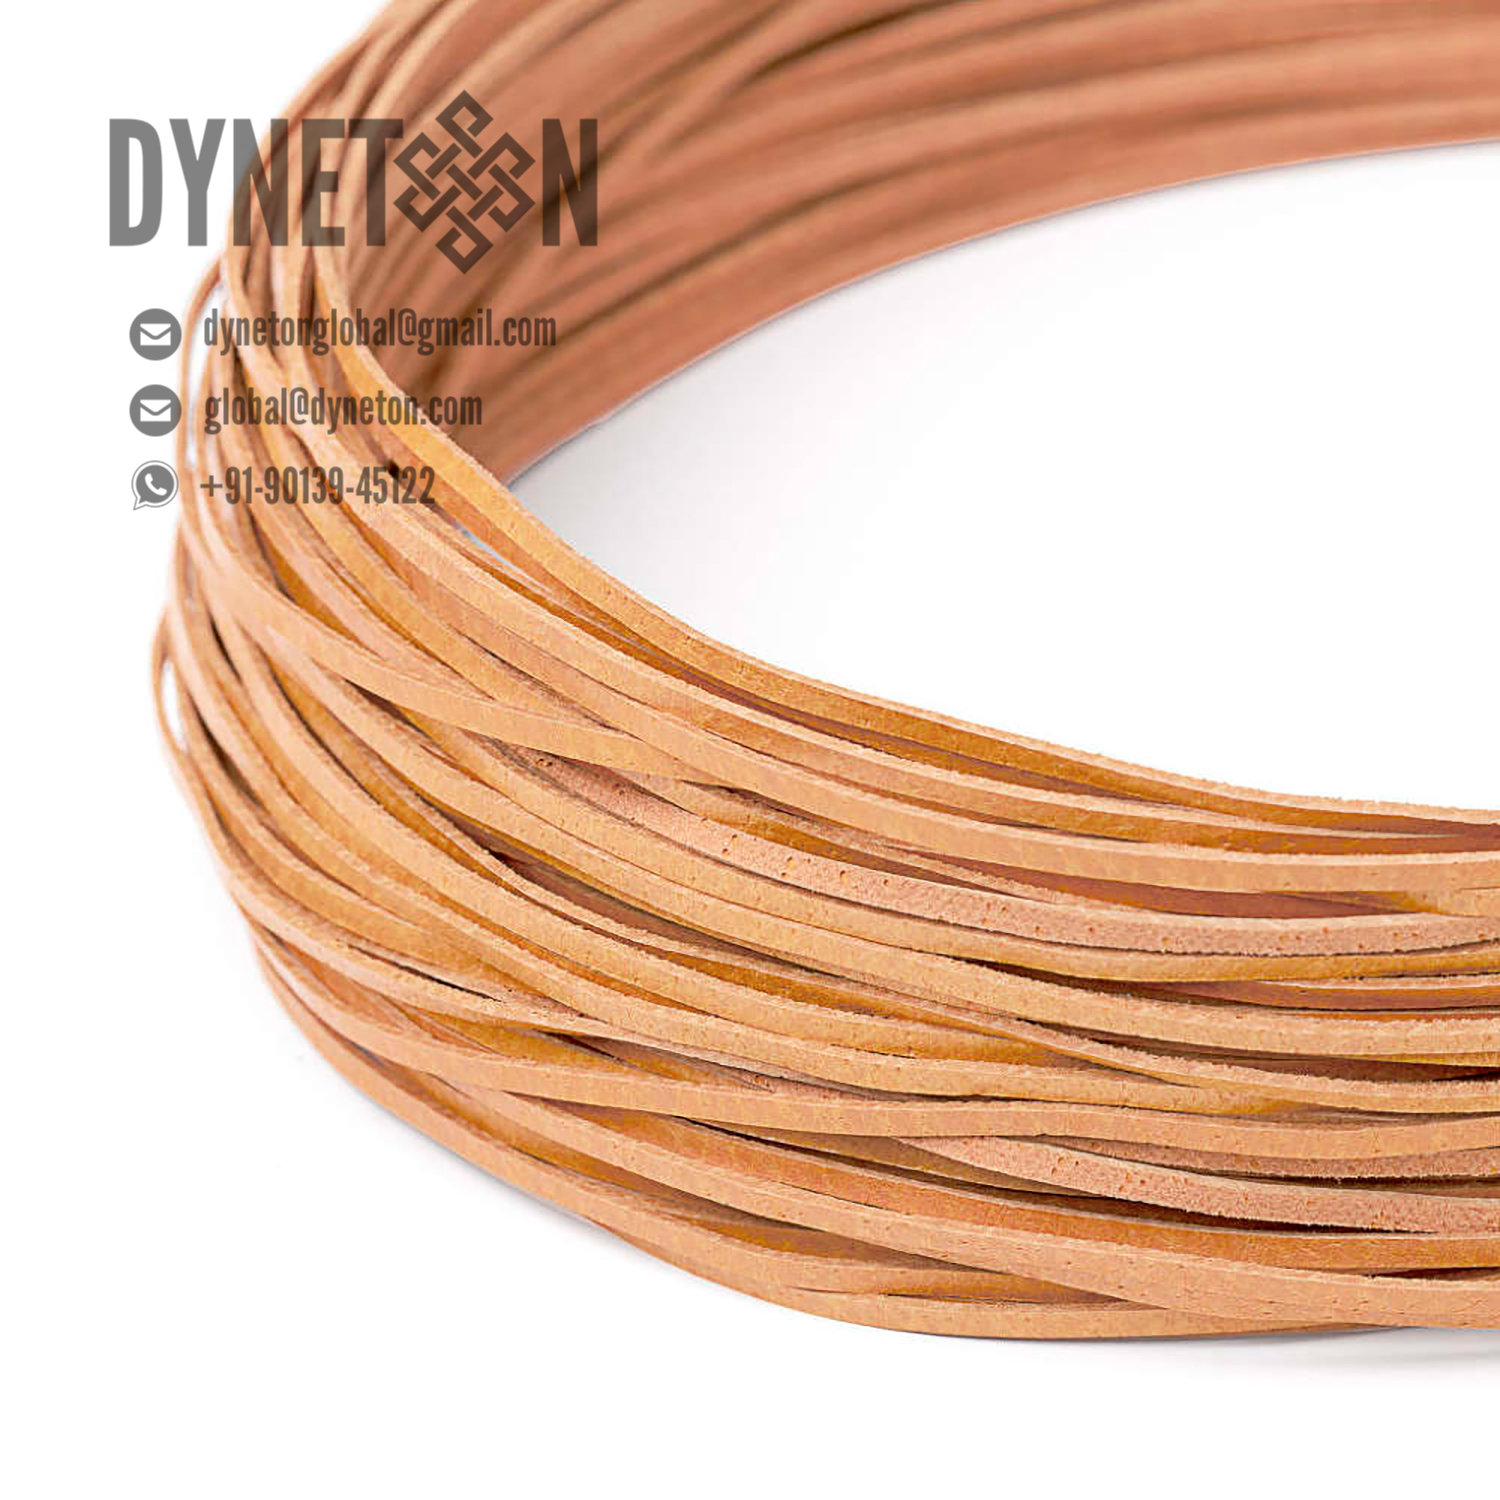 2mm Flat Leather Cord - DYNETON / Flat Leather Cords 2 mm